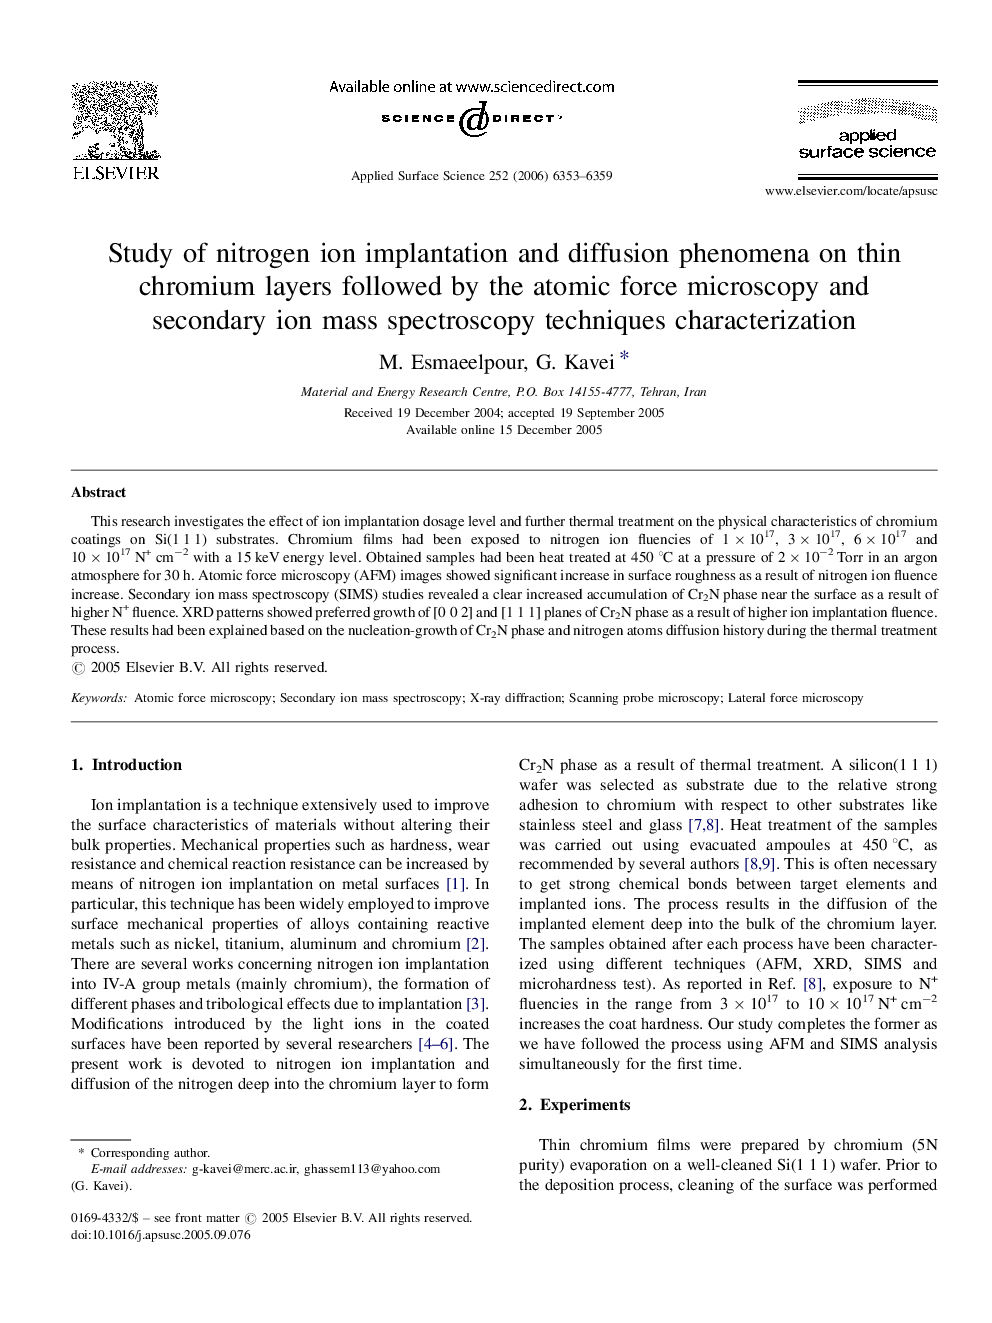 Study of nitrogen ion implantation and diffusion phenomena on thin chromium layers followed by the atomic force microscopy and secondary ion mass spectroscopy techniques characterization